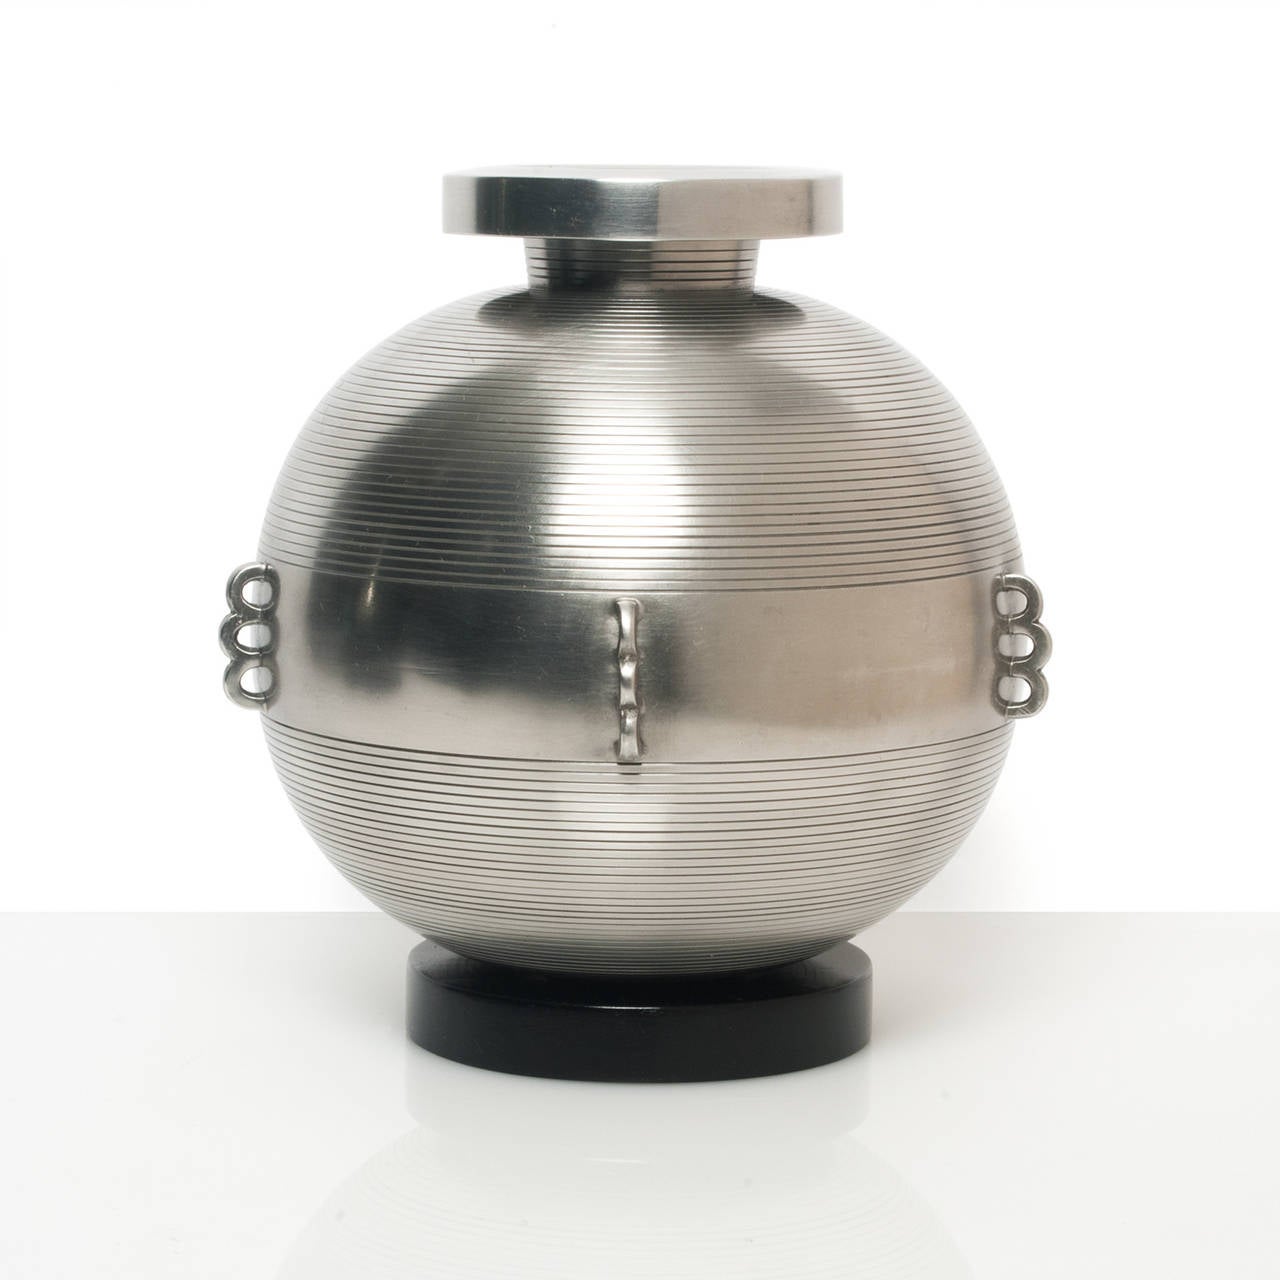 Scandinavian modern, Swedish Art Deco polished pewter vase on a black lacquered wood base. The vase is detailed with finely detailed horizontal lines and a center band with raised arches. Designed by Sylvia Stave for C.G. Hallberg circa 1934,